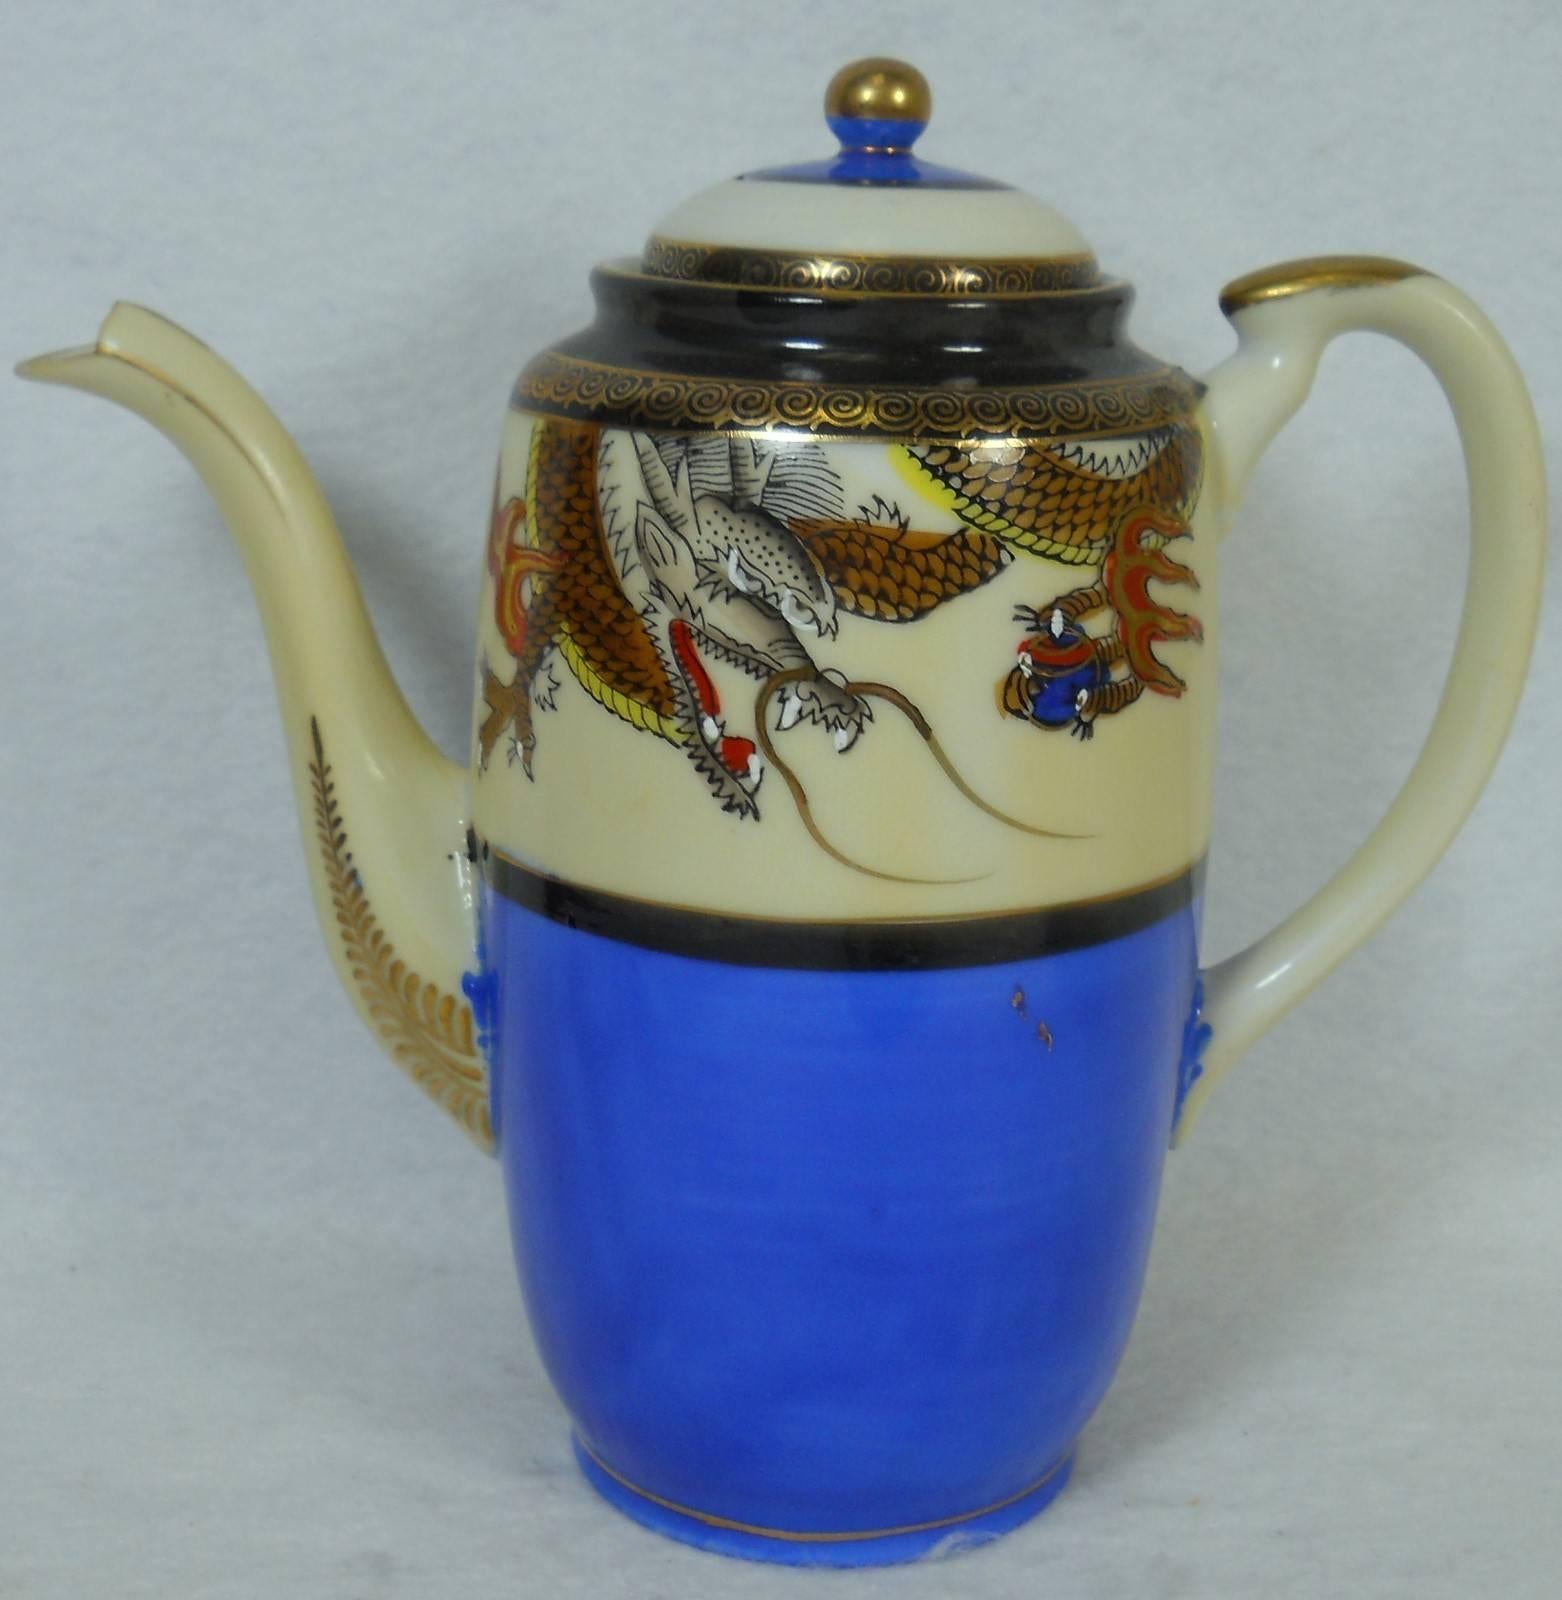 Made in Japan China Dragonware dragon ware 17-piece mini or demitasse coffee or chocolate set,

in great condition free-from chips, cracks, breaks, stains, or discoloration and with only a minimum of use.

Embossed Dragon - Blue